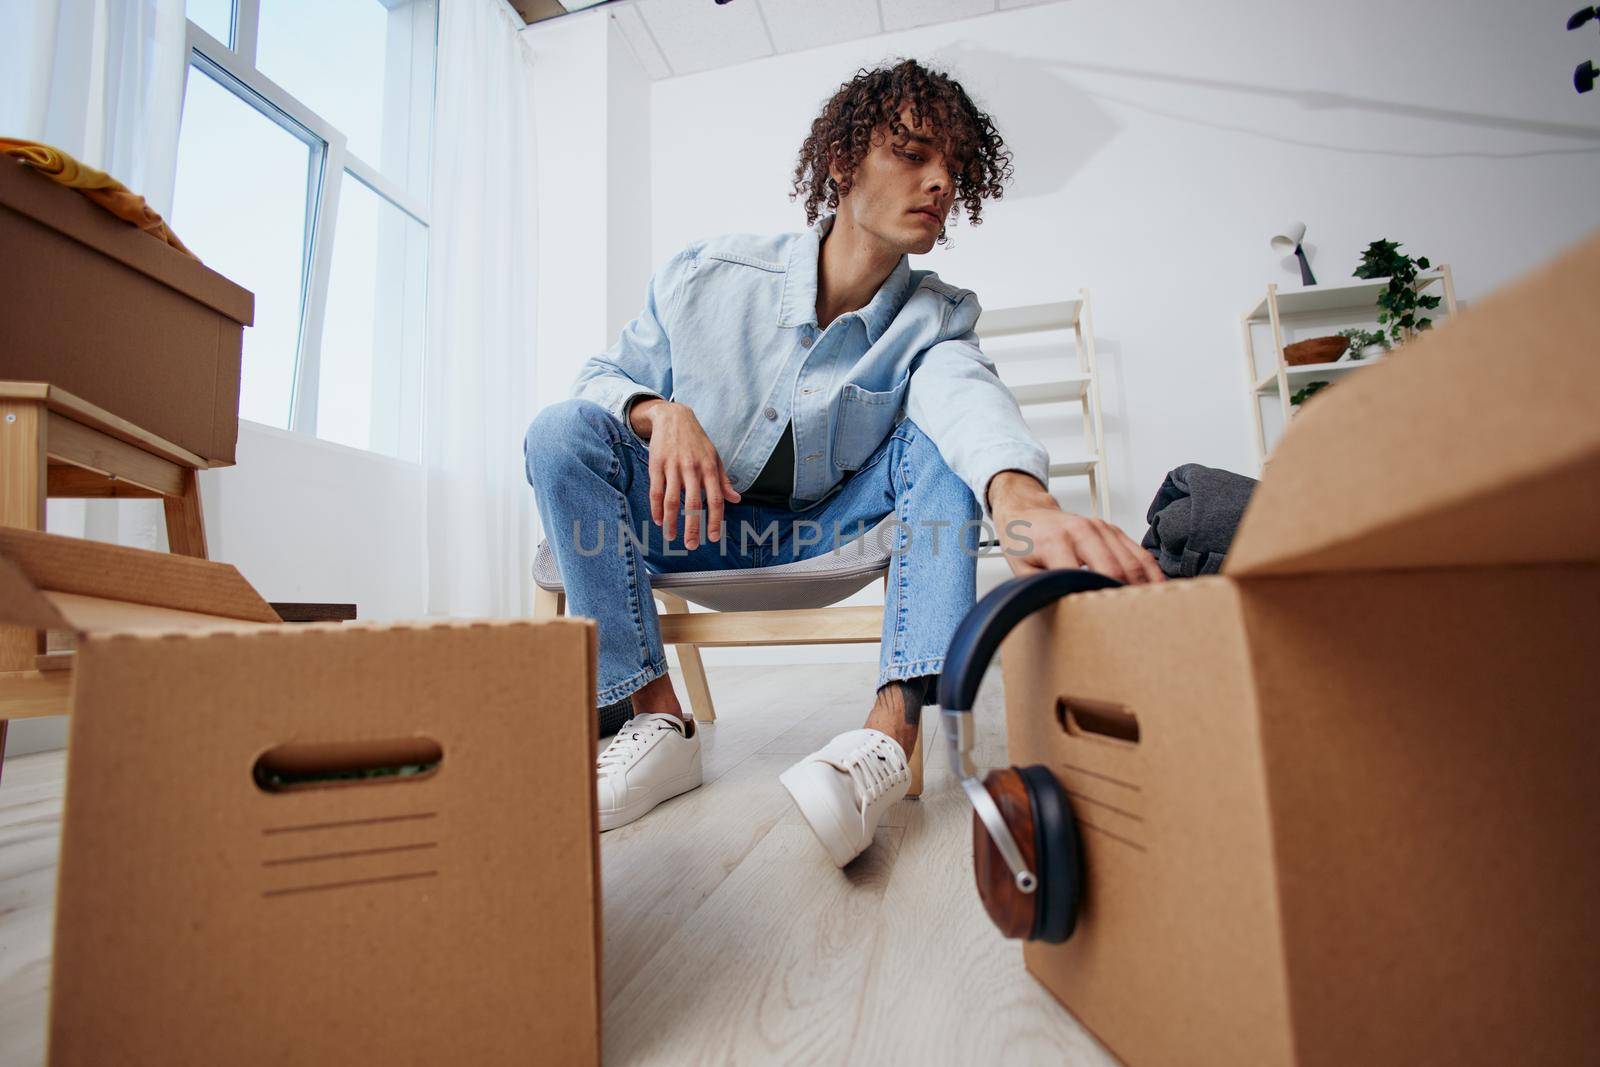 portrait of a man sitting on a chair with boxes moving Lifestyle by SHOTPRIME